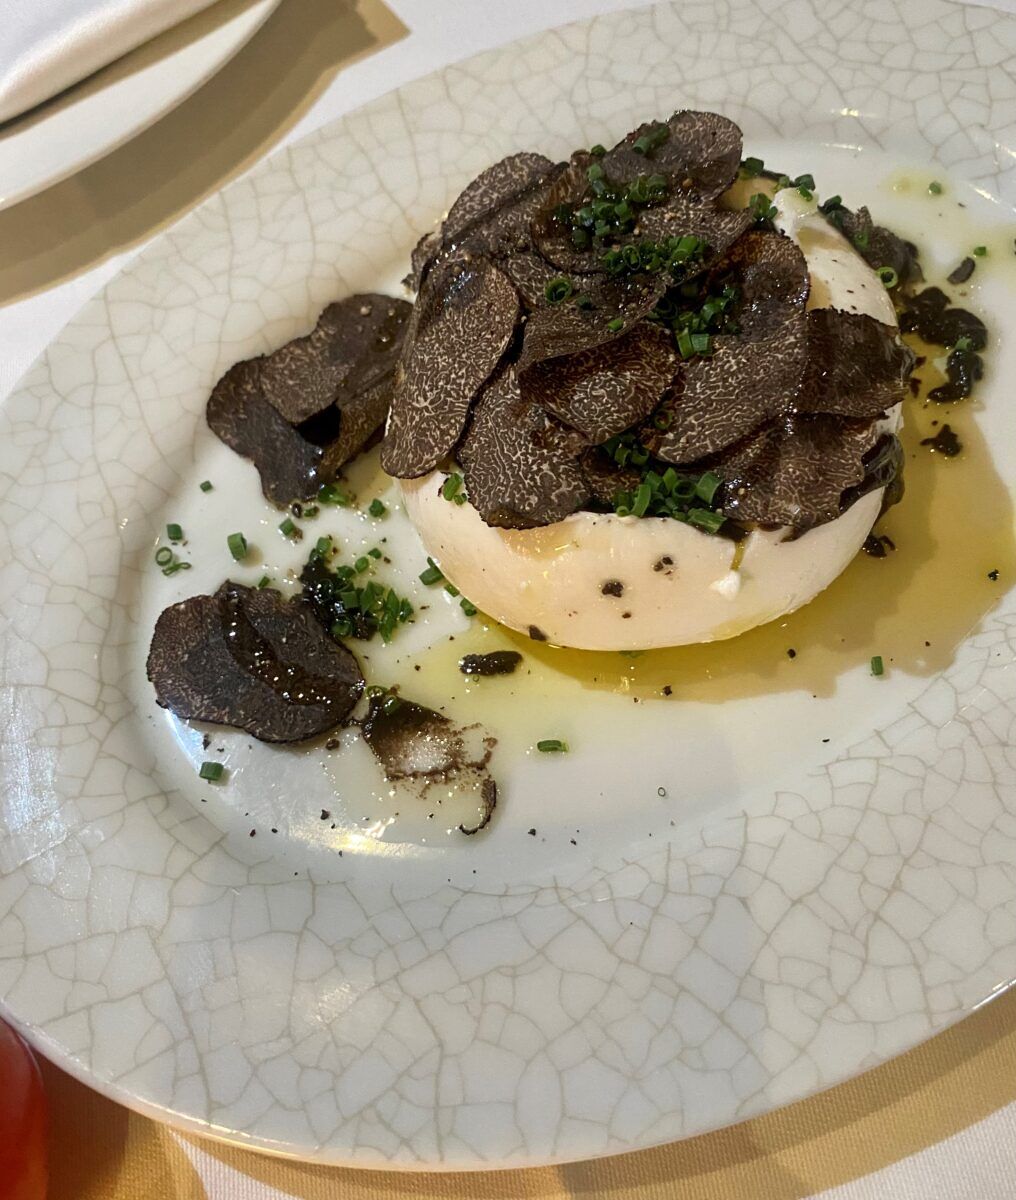 LPM's burrata prepared with heritage tomatoes and basil and topped with white truffles.